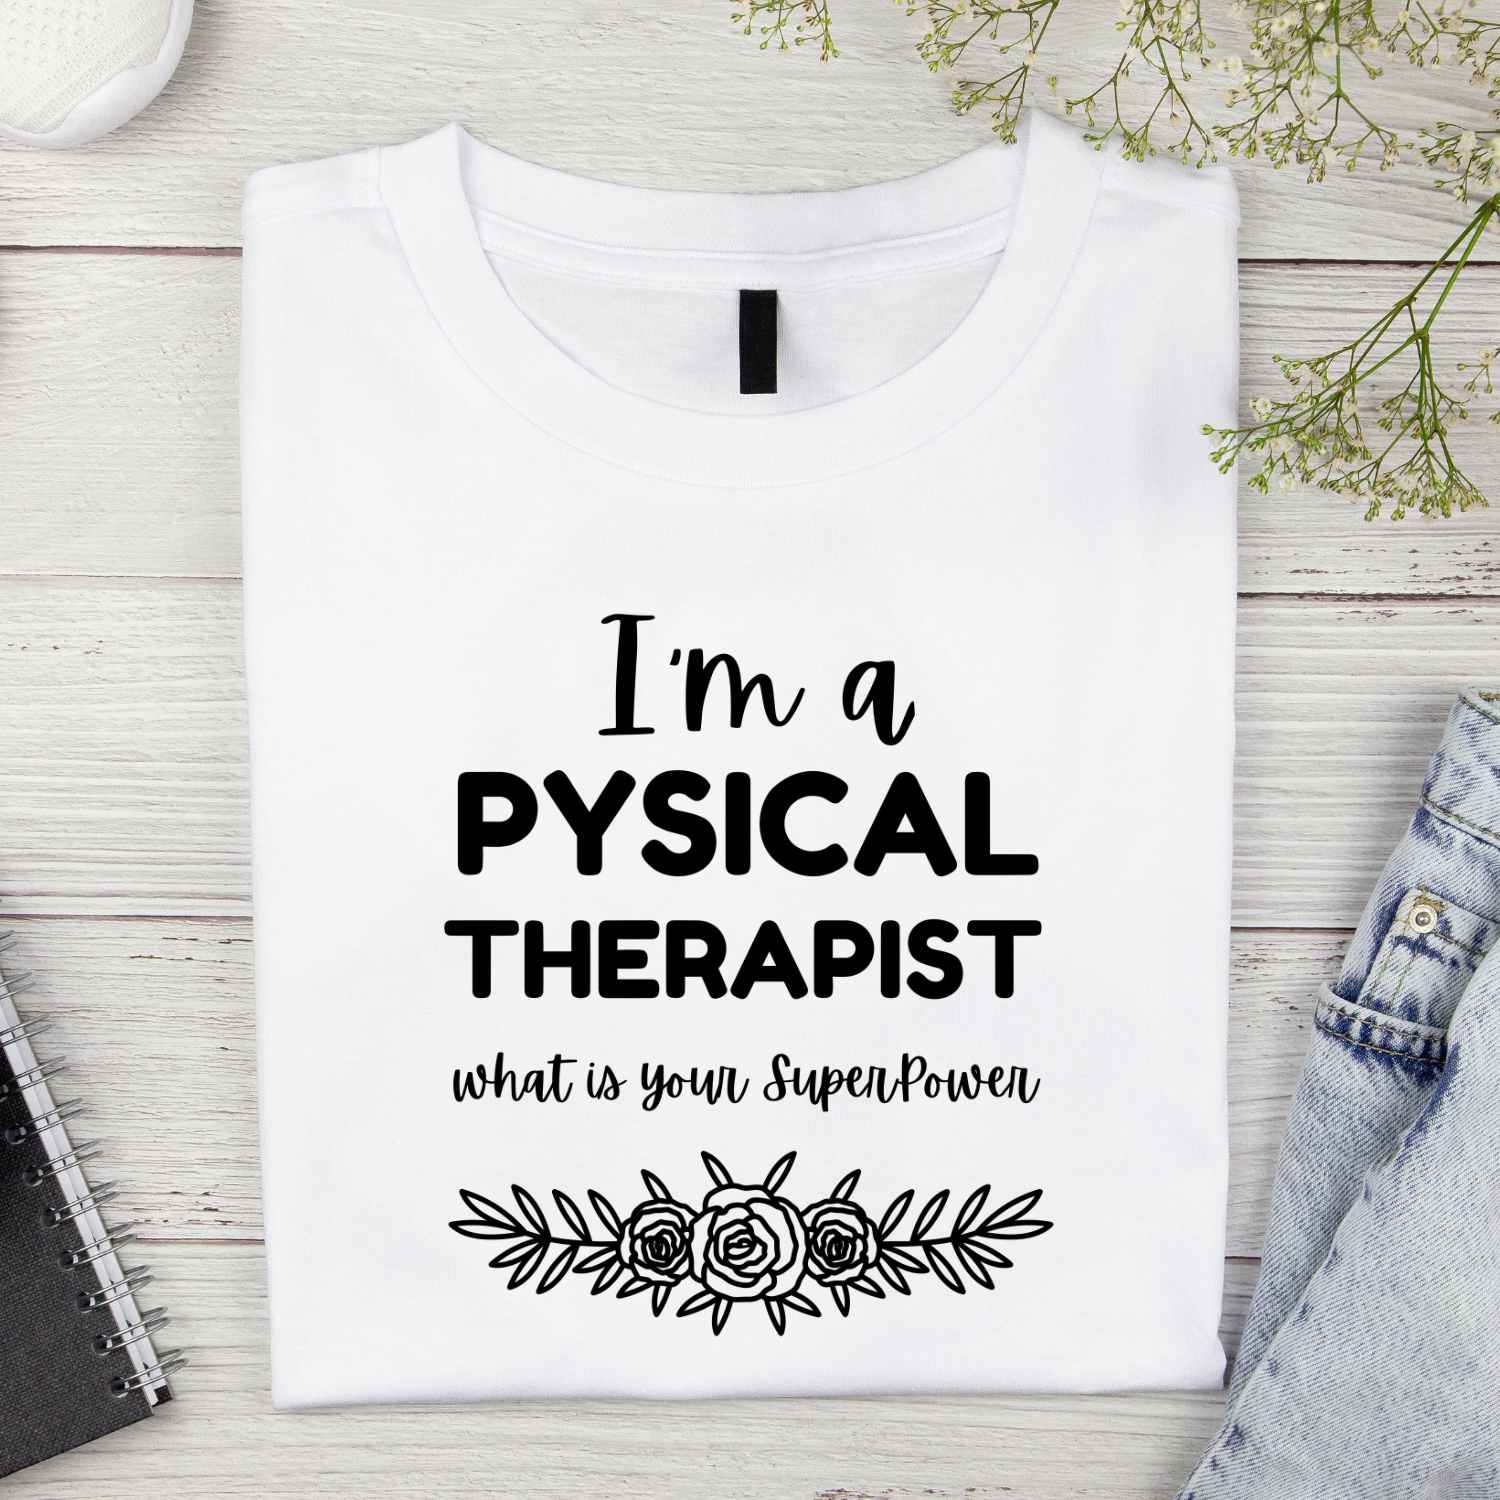 I am a Physical Therapist what is your Superpower T-shirt Design